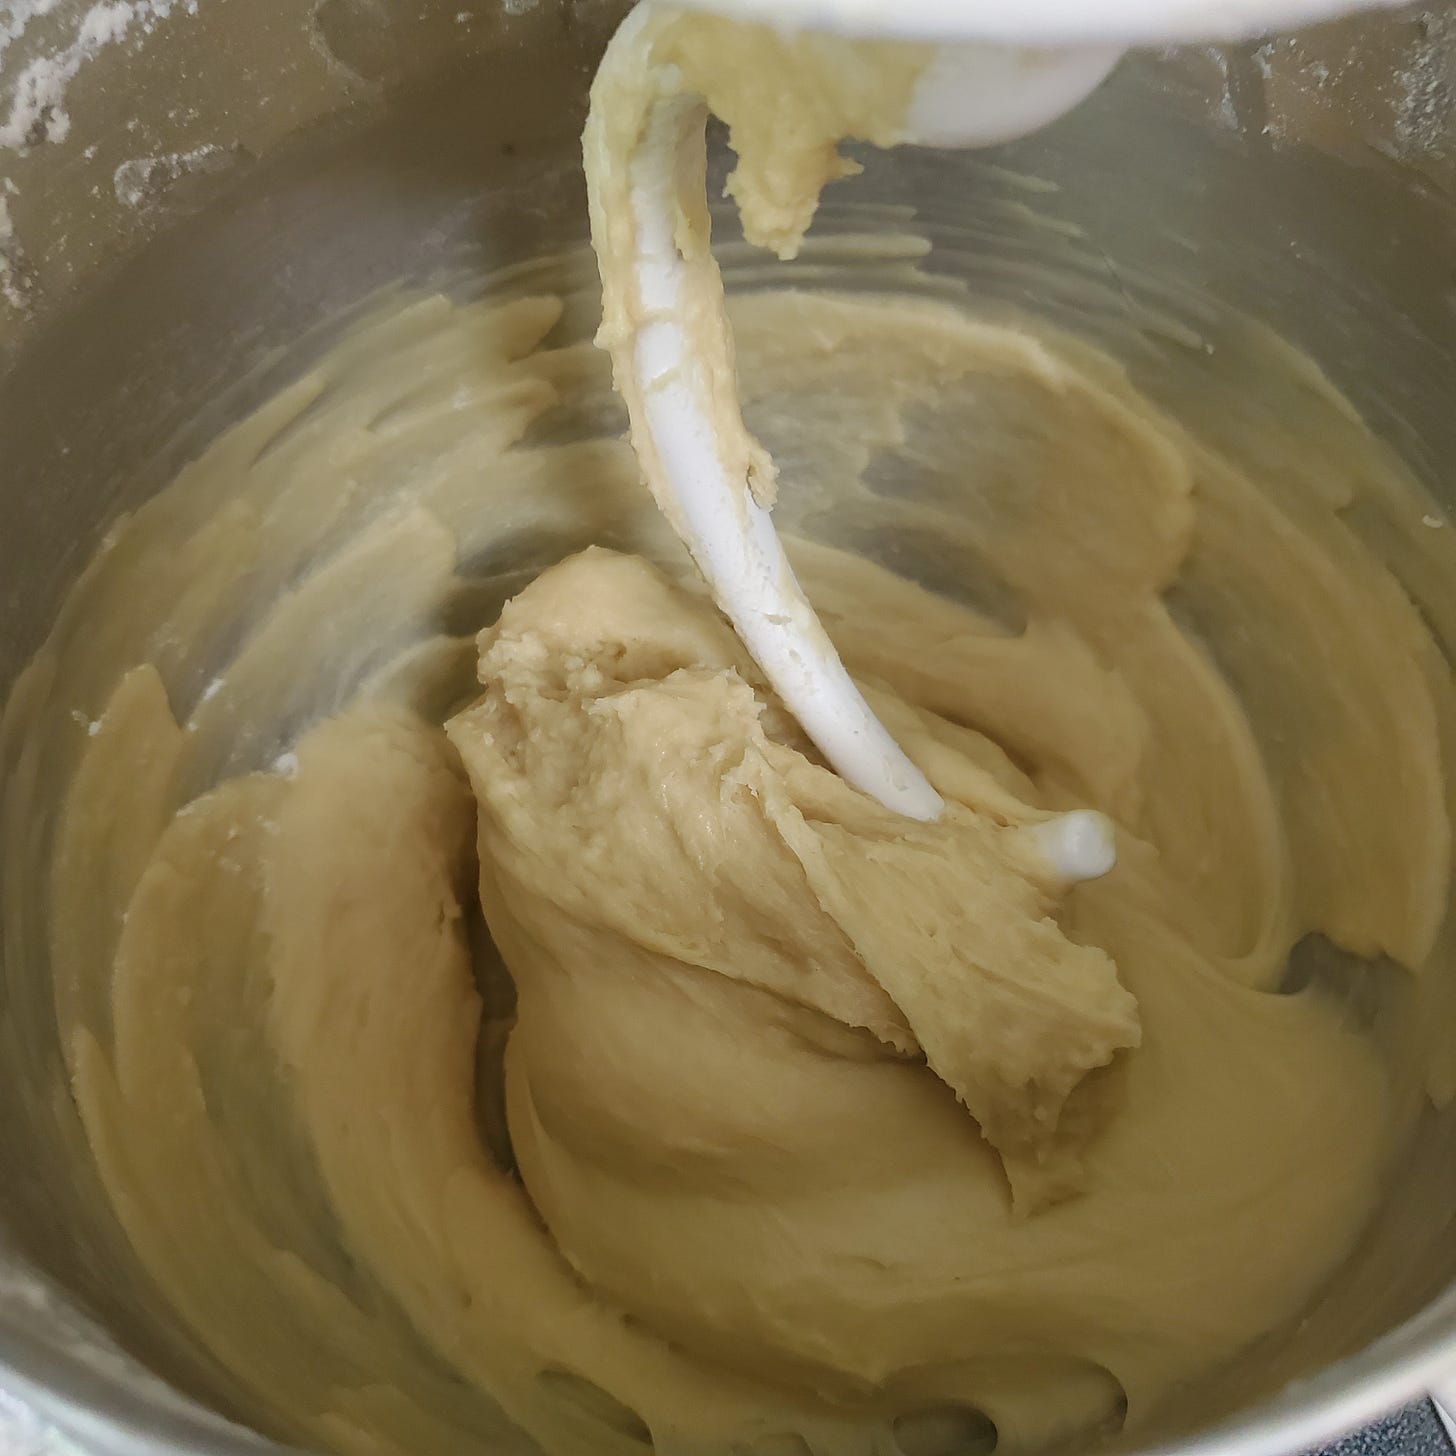 Extremely wet bread dough in the bowl of a stand mixer.